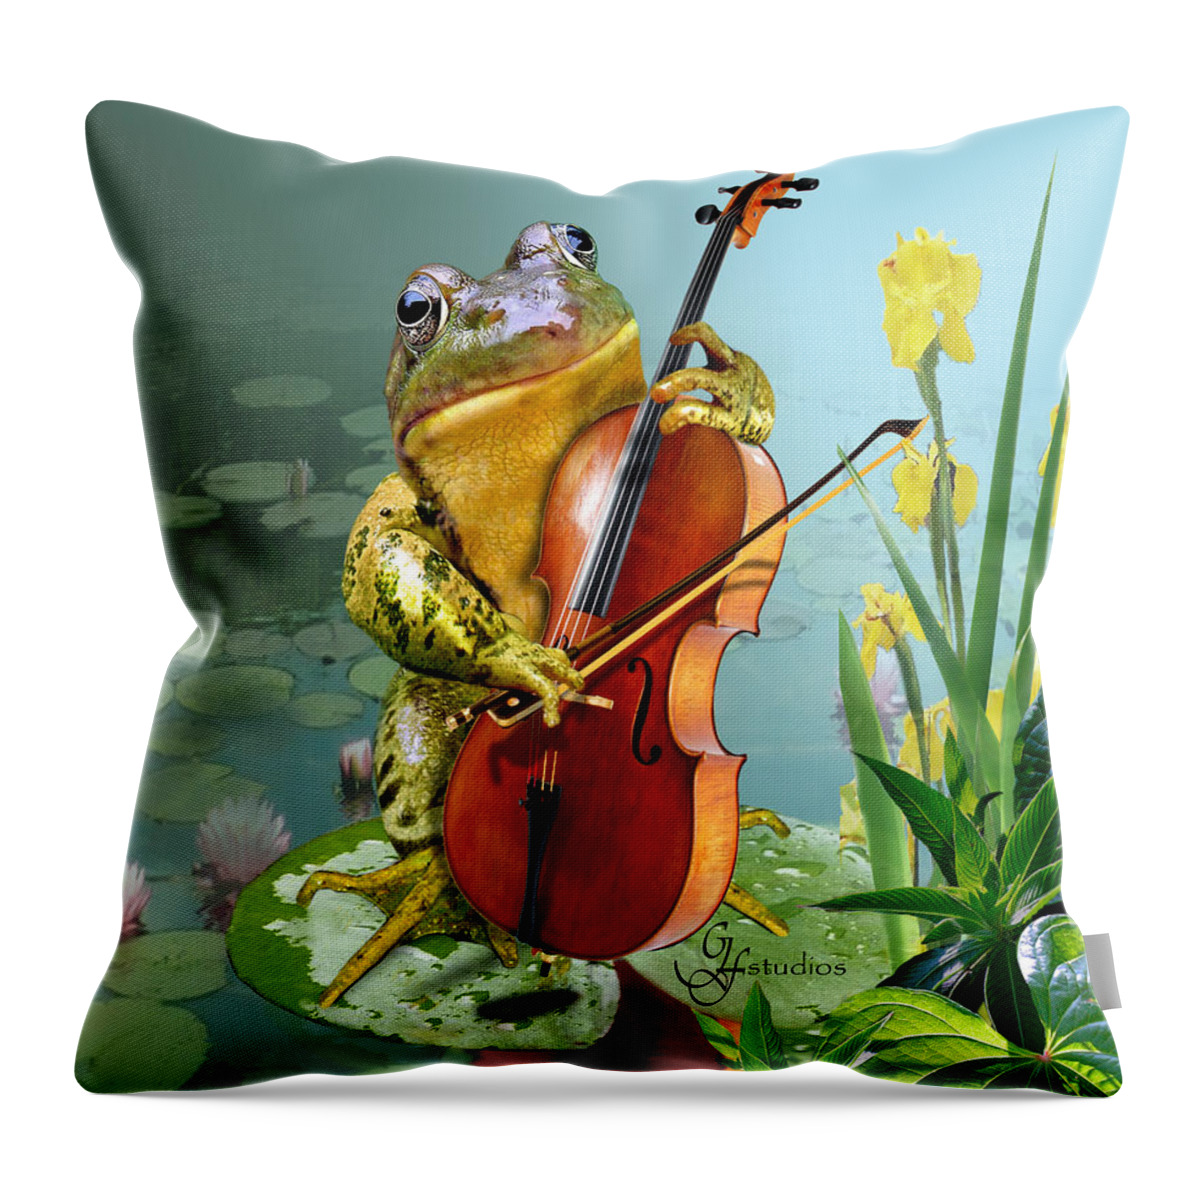 Humorous Scene Frog Playing Cello In Lily Pond Throw Pillow featuring the painting Humorous scene frog playing cello in lily pond by Regina Femrite